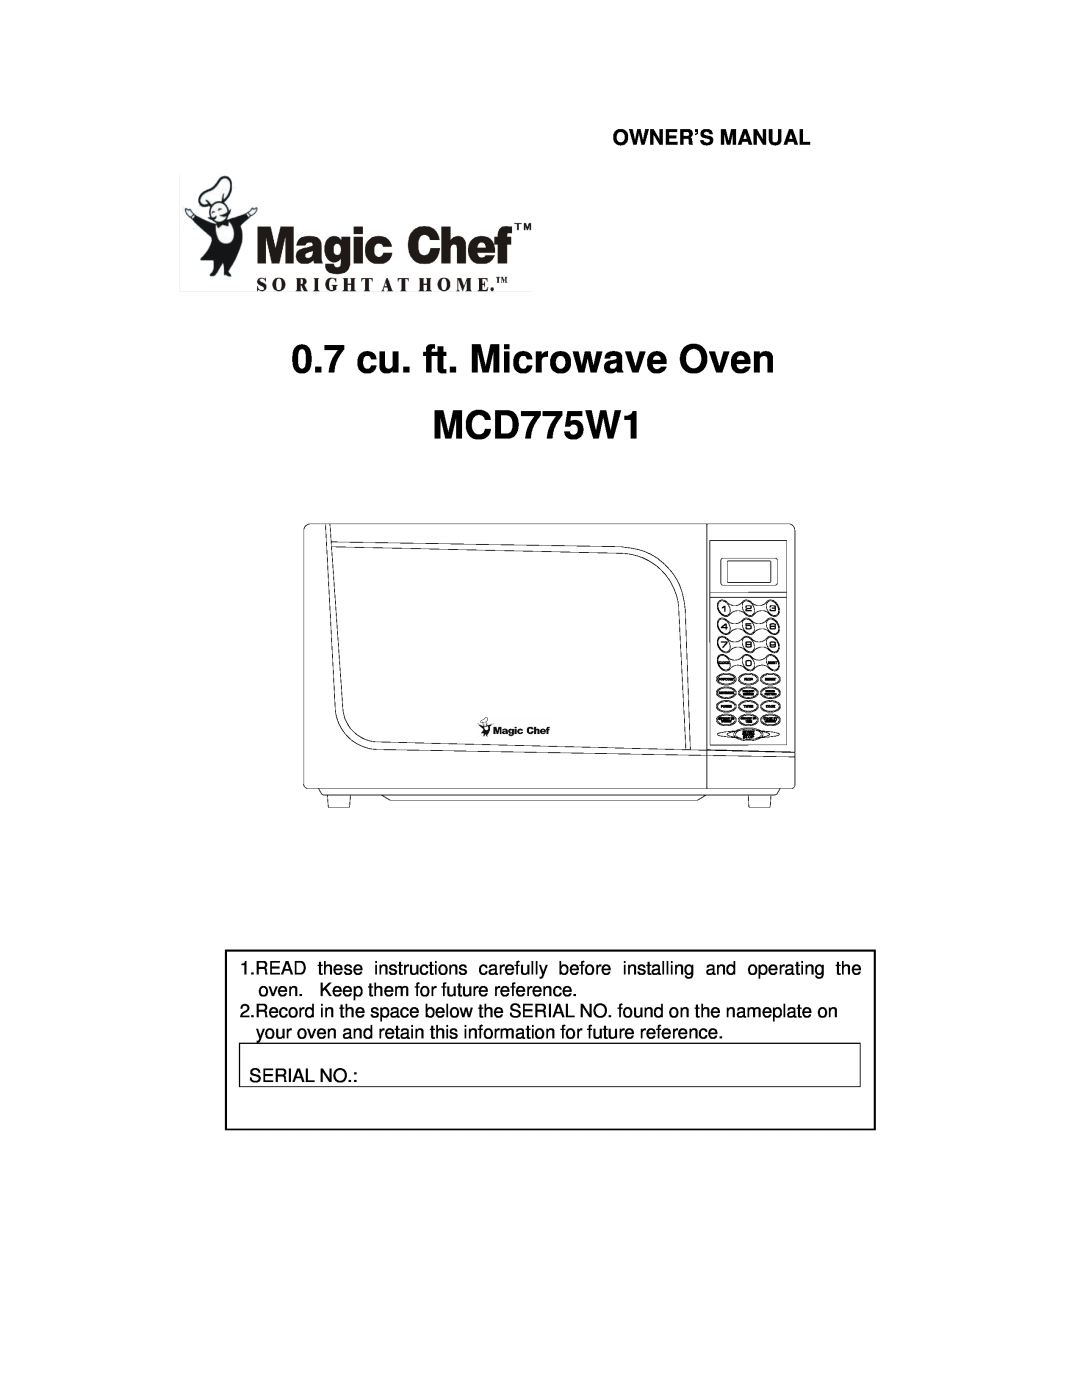 Magic Chef owner manual 0.7cu. ft. Microwave Oven MCD775W1 